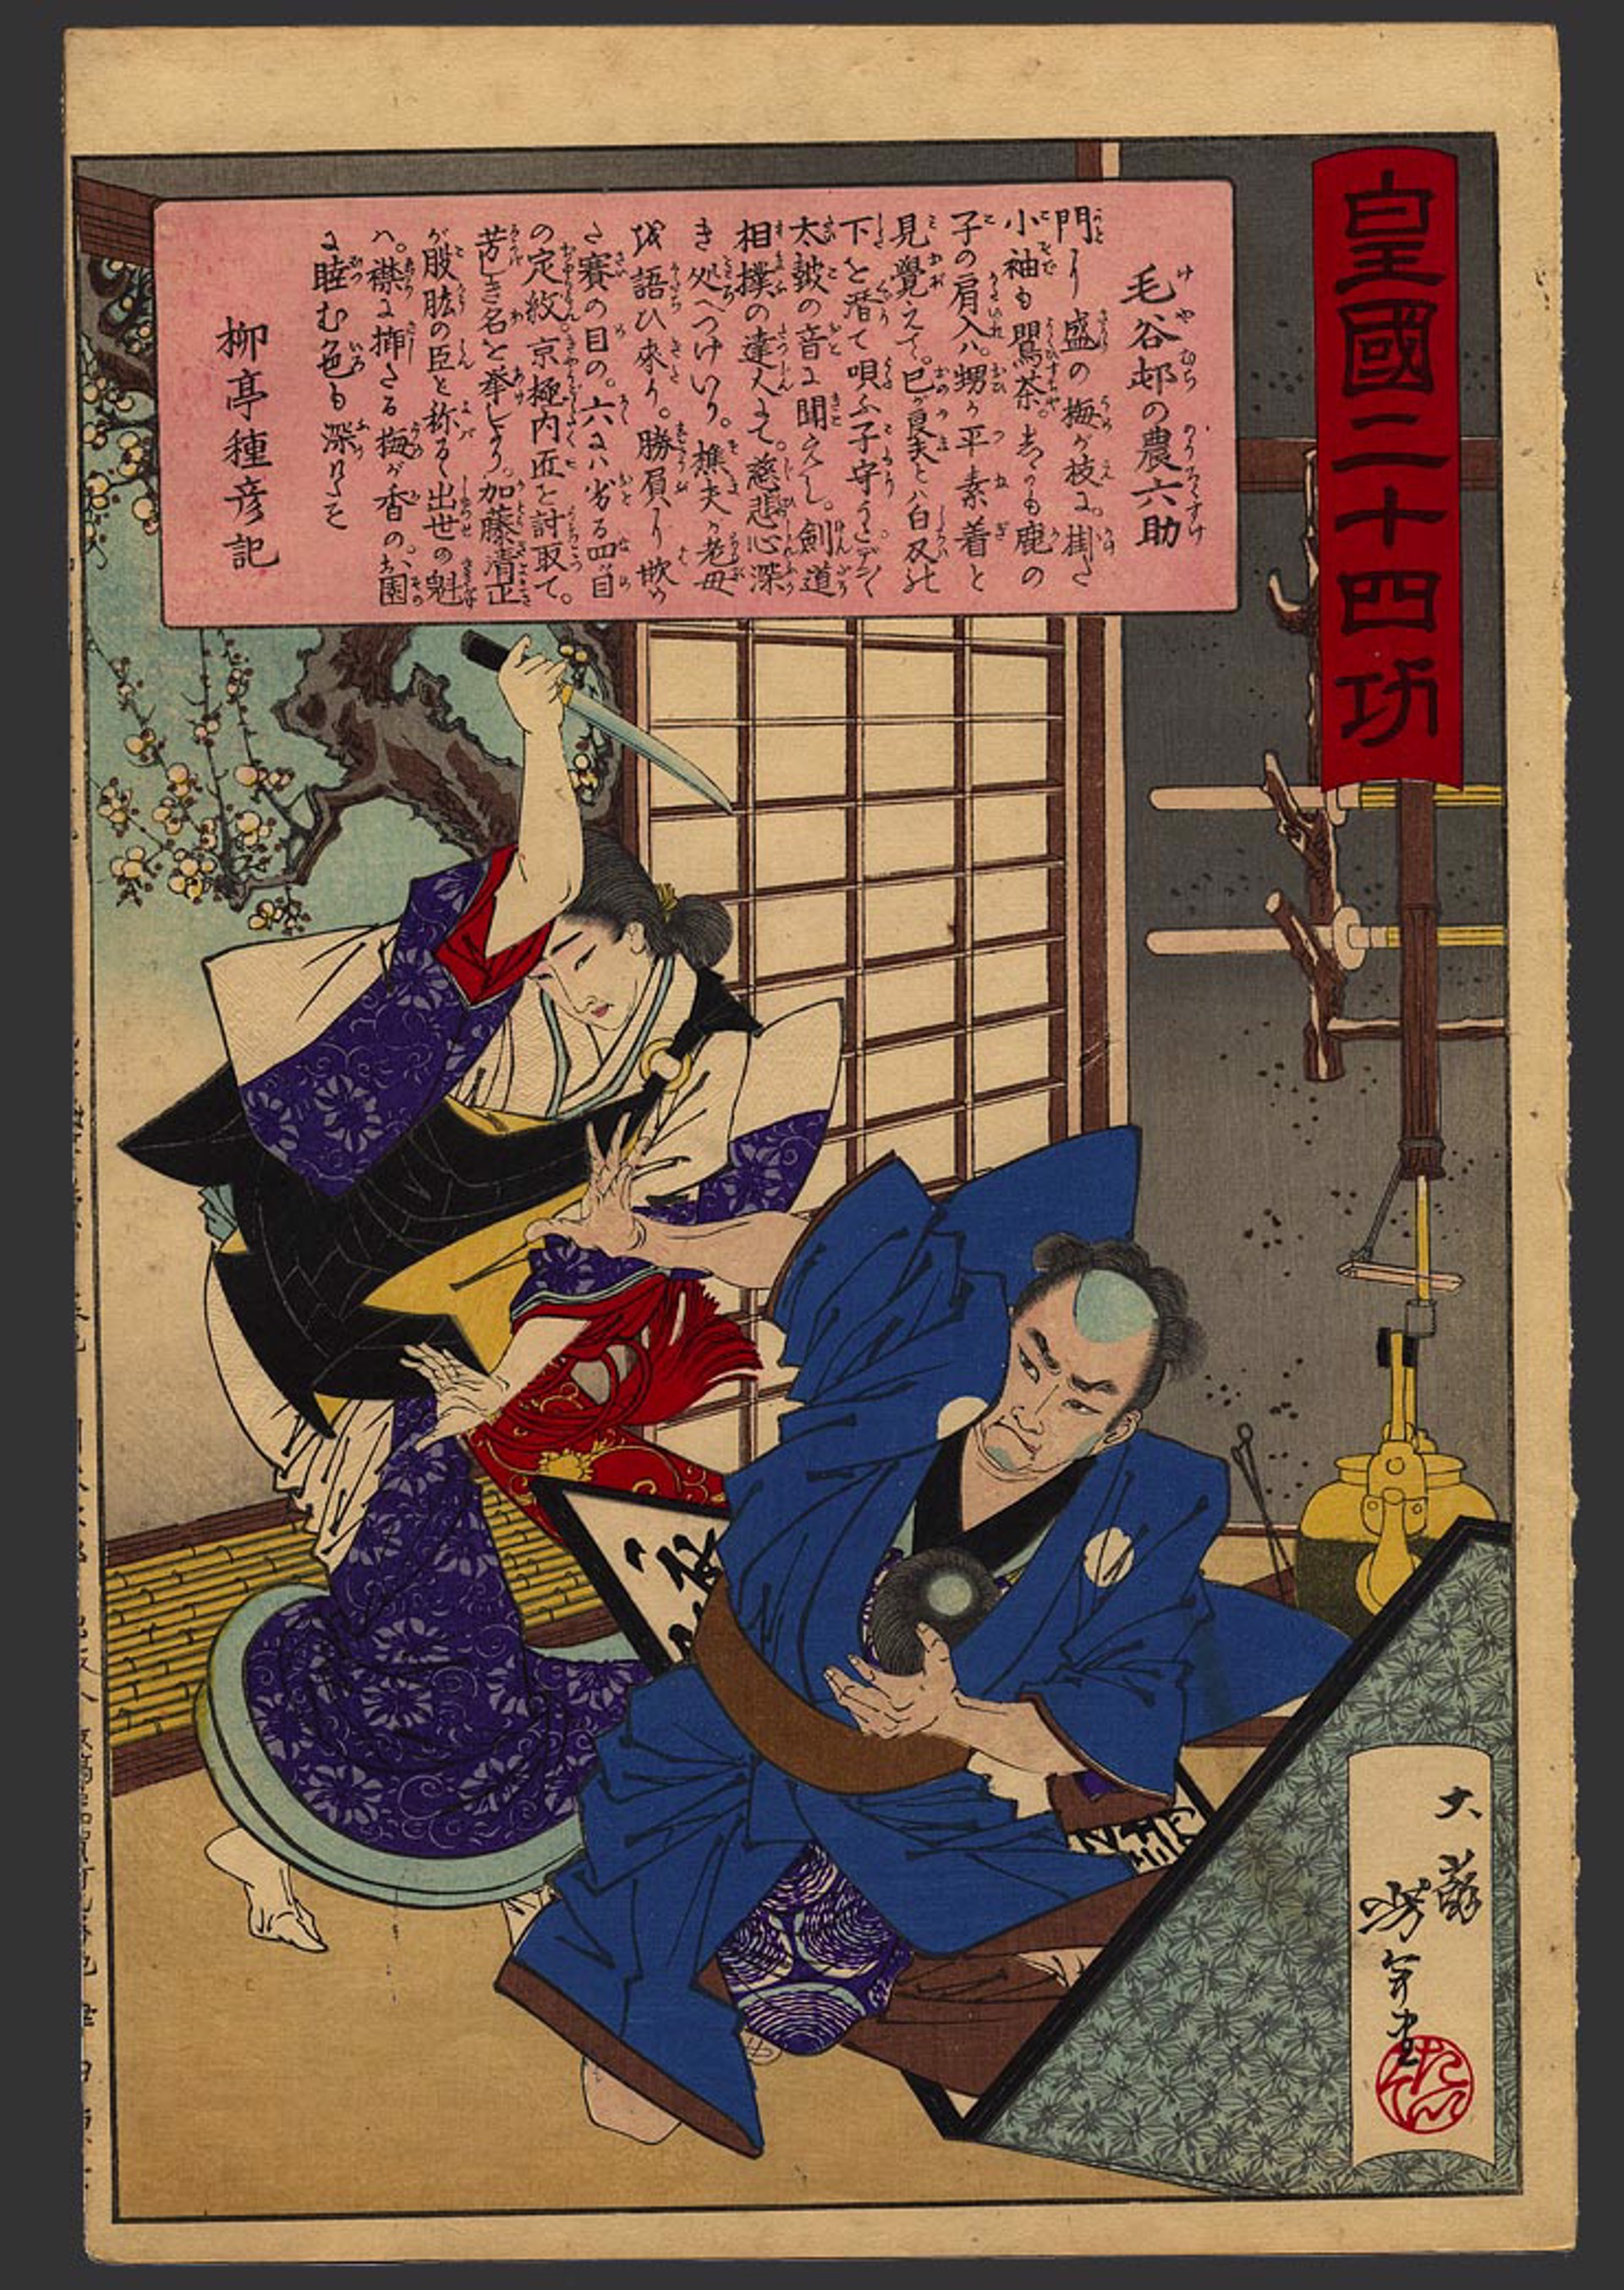 #8`Osone attacking Keyamura Rokusuke thinking he had killed her father. 24 Accomplishments in Imperial Japan by Yoshitoshi